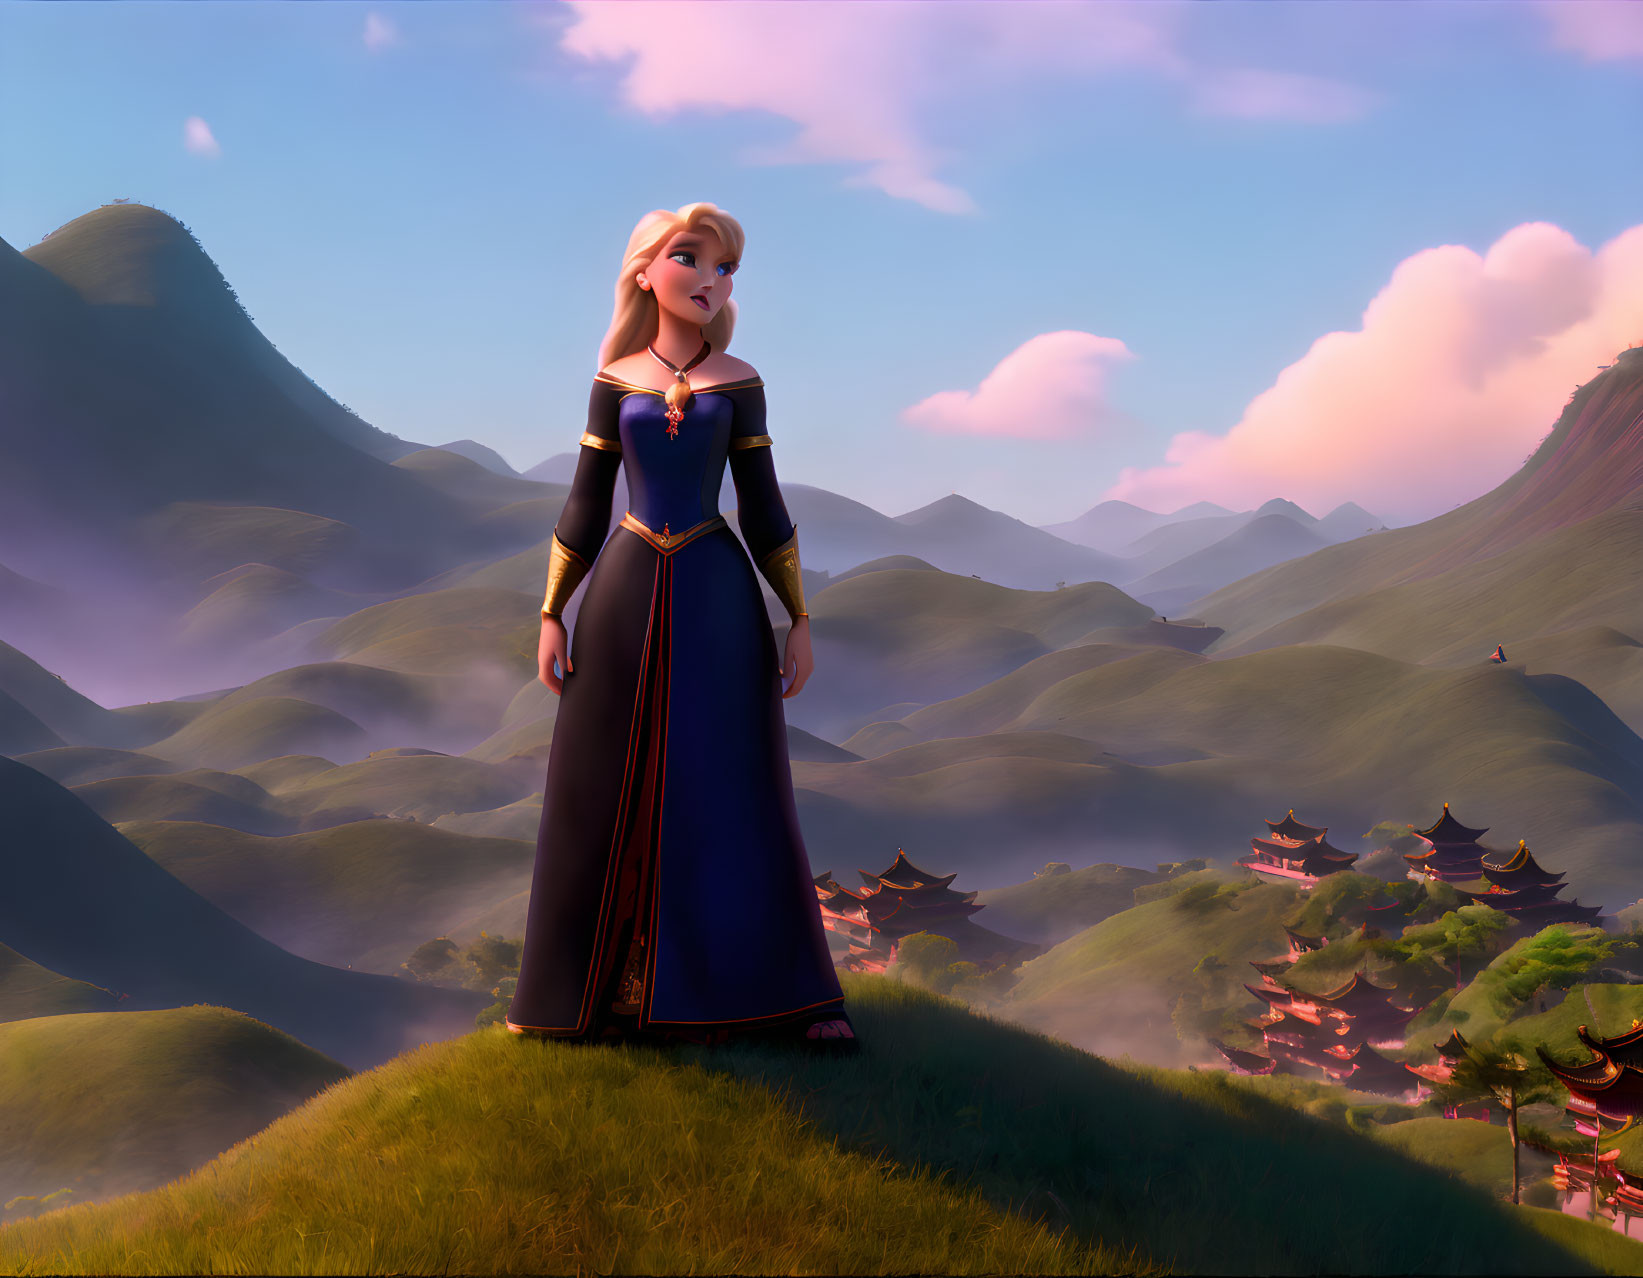 Regal woman in animated dress on grassy hill with Asian pagodas and mountains in warm sky